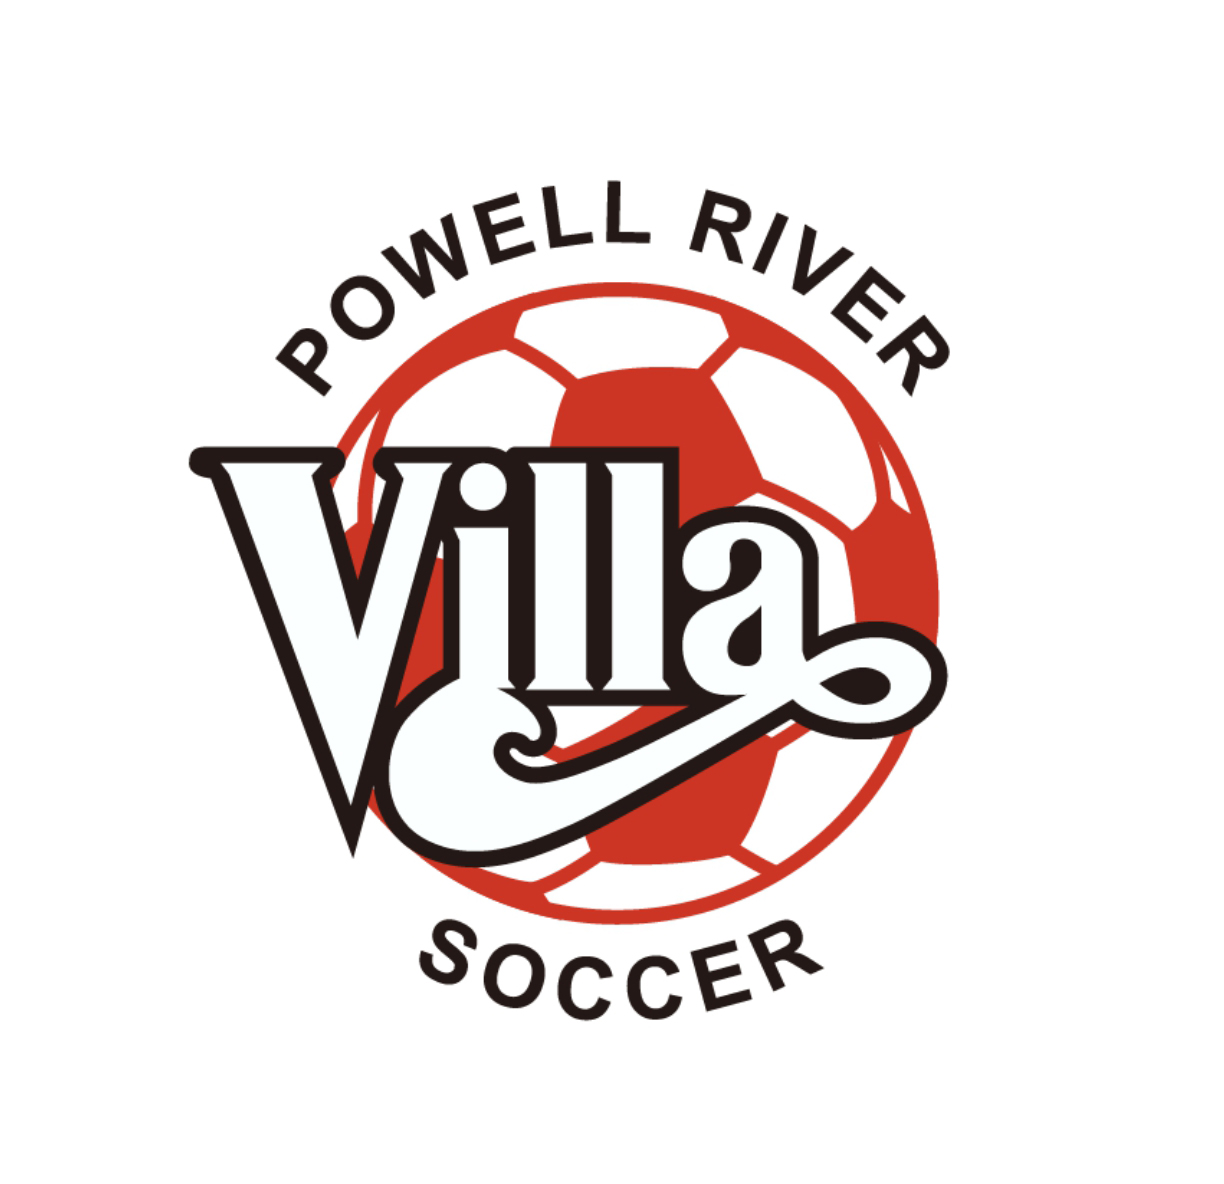 Powell River Youth Soccer Association